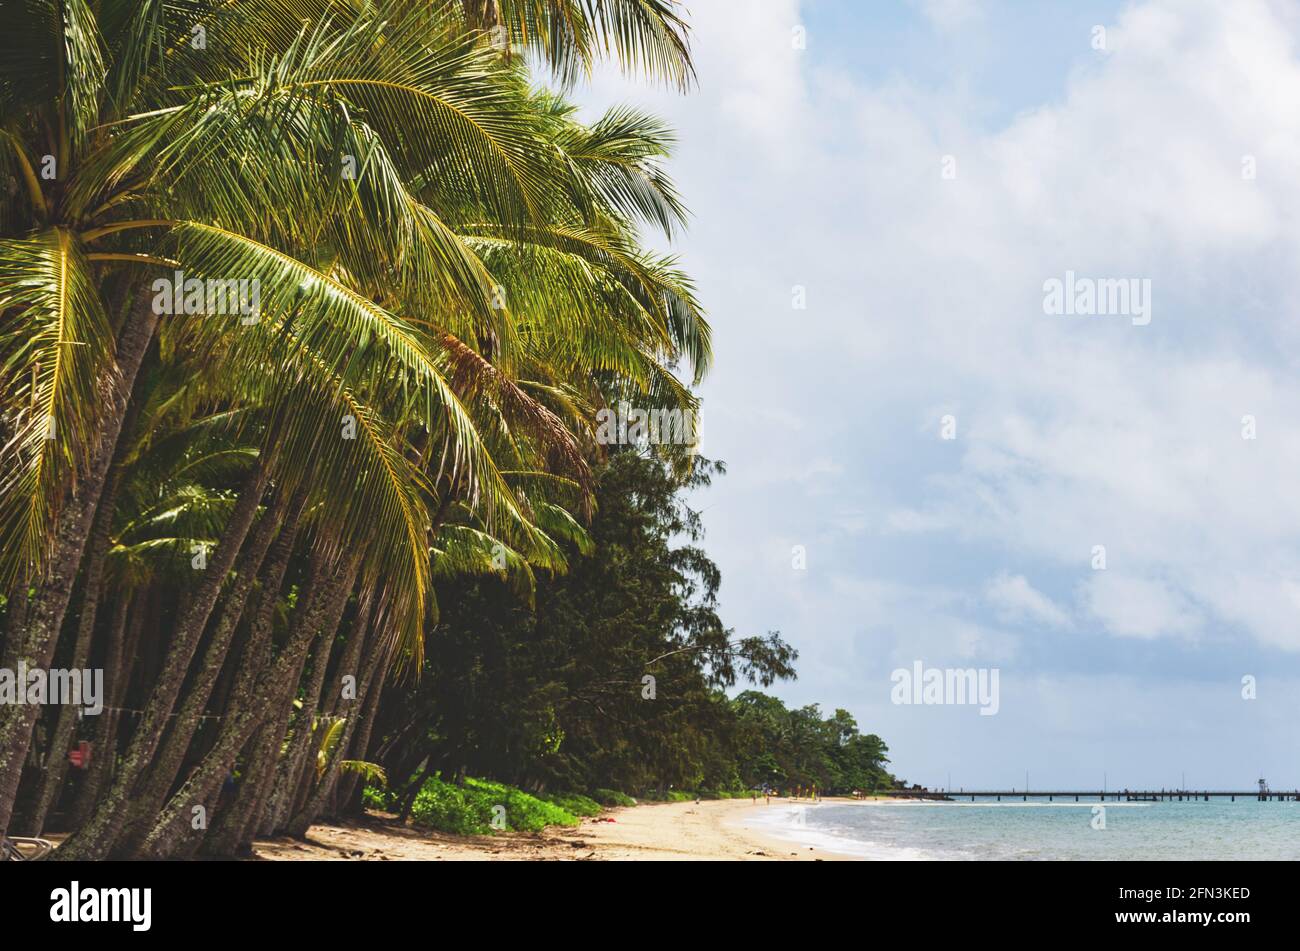 Palm Cove Australia High Resolution Stock Photography and Images - Alamy